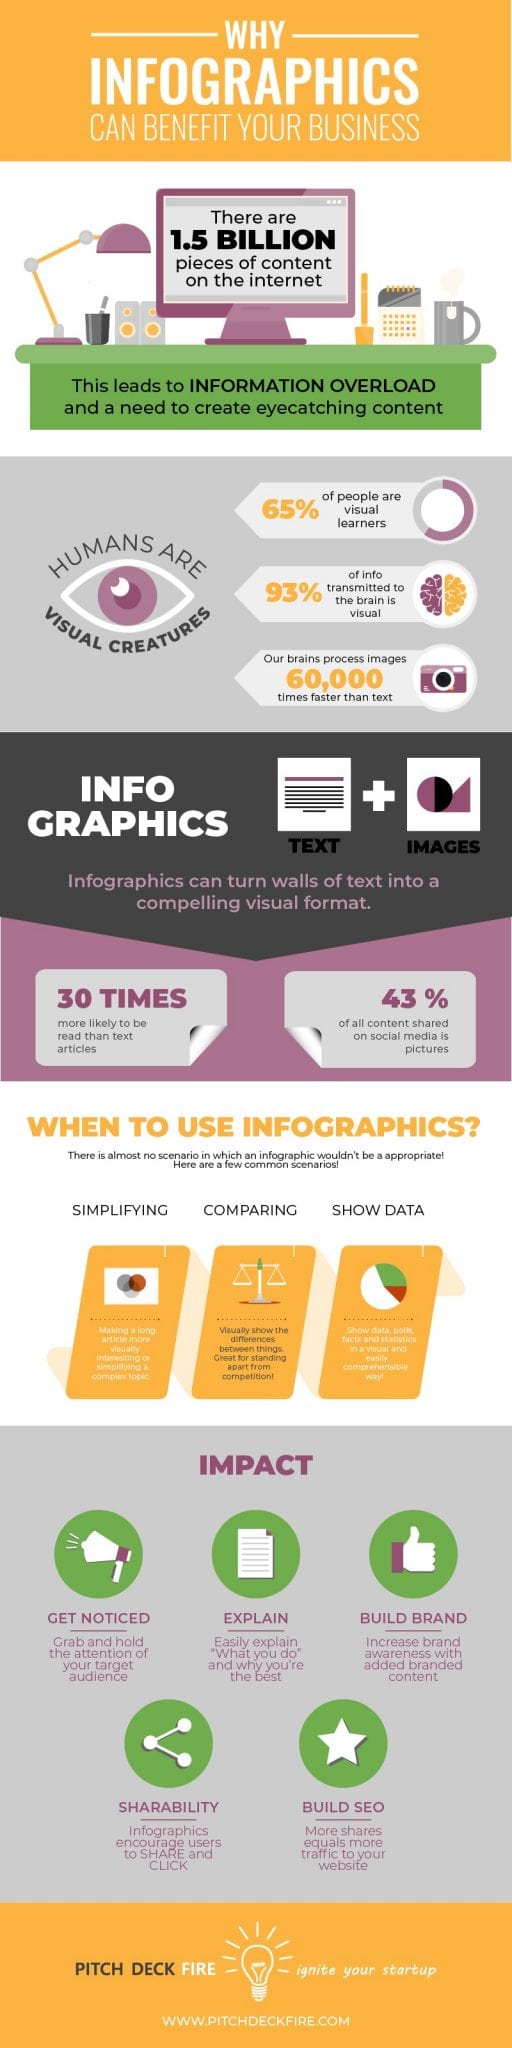 Why infographics benefit your business